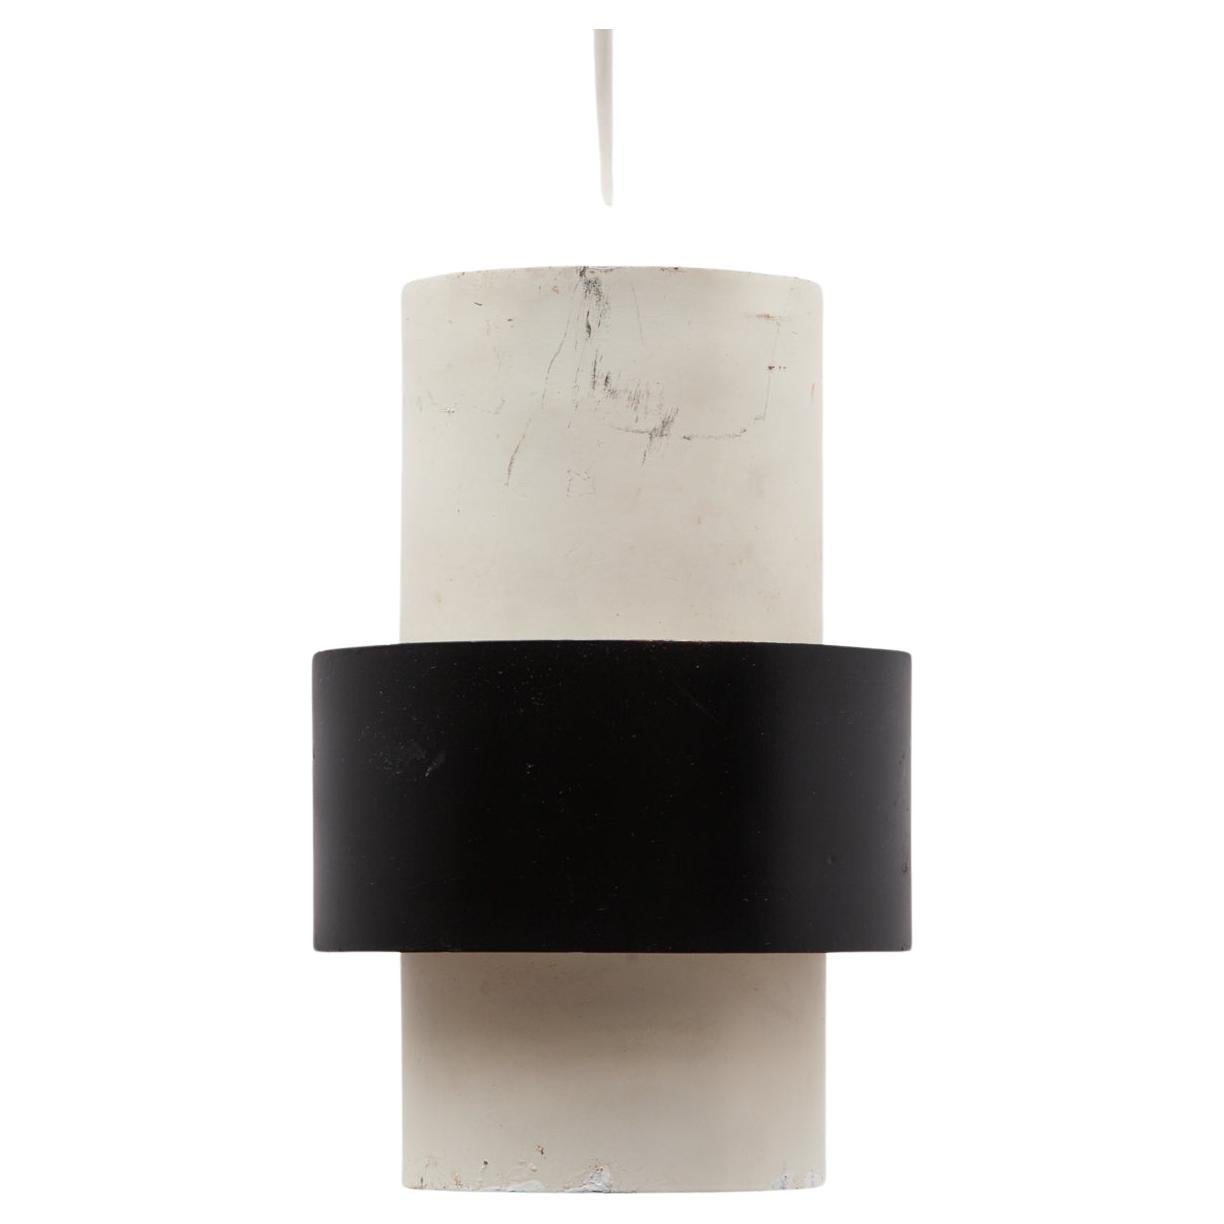 This mid-century Dutch design hanging lamp was designed by Kalff. The inside of the cylinder and the outside of the drum have a layered shape, crafted with a mixed metal aesthetic, in white and black. Three lamps available.